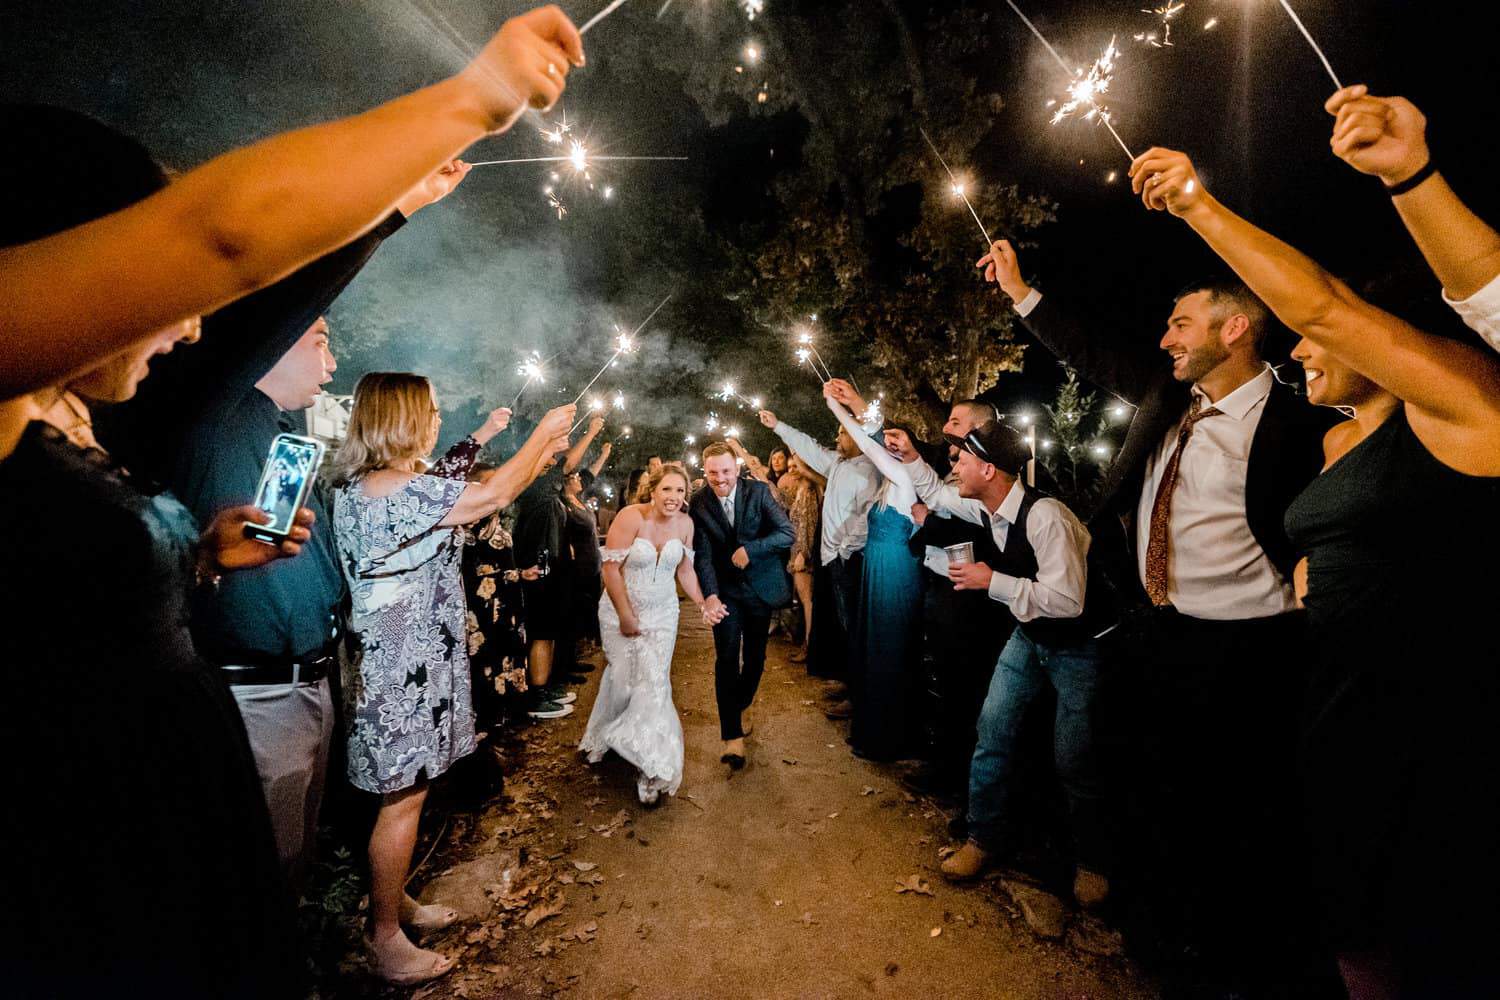 A bride and groom walking down a path with sparklers in their hands.